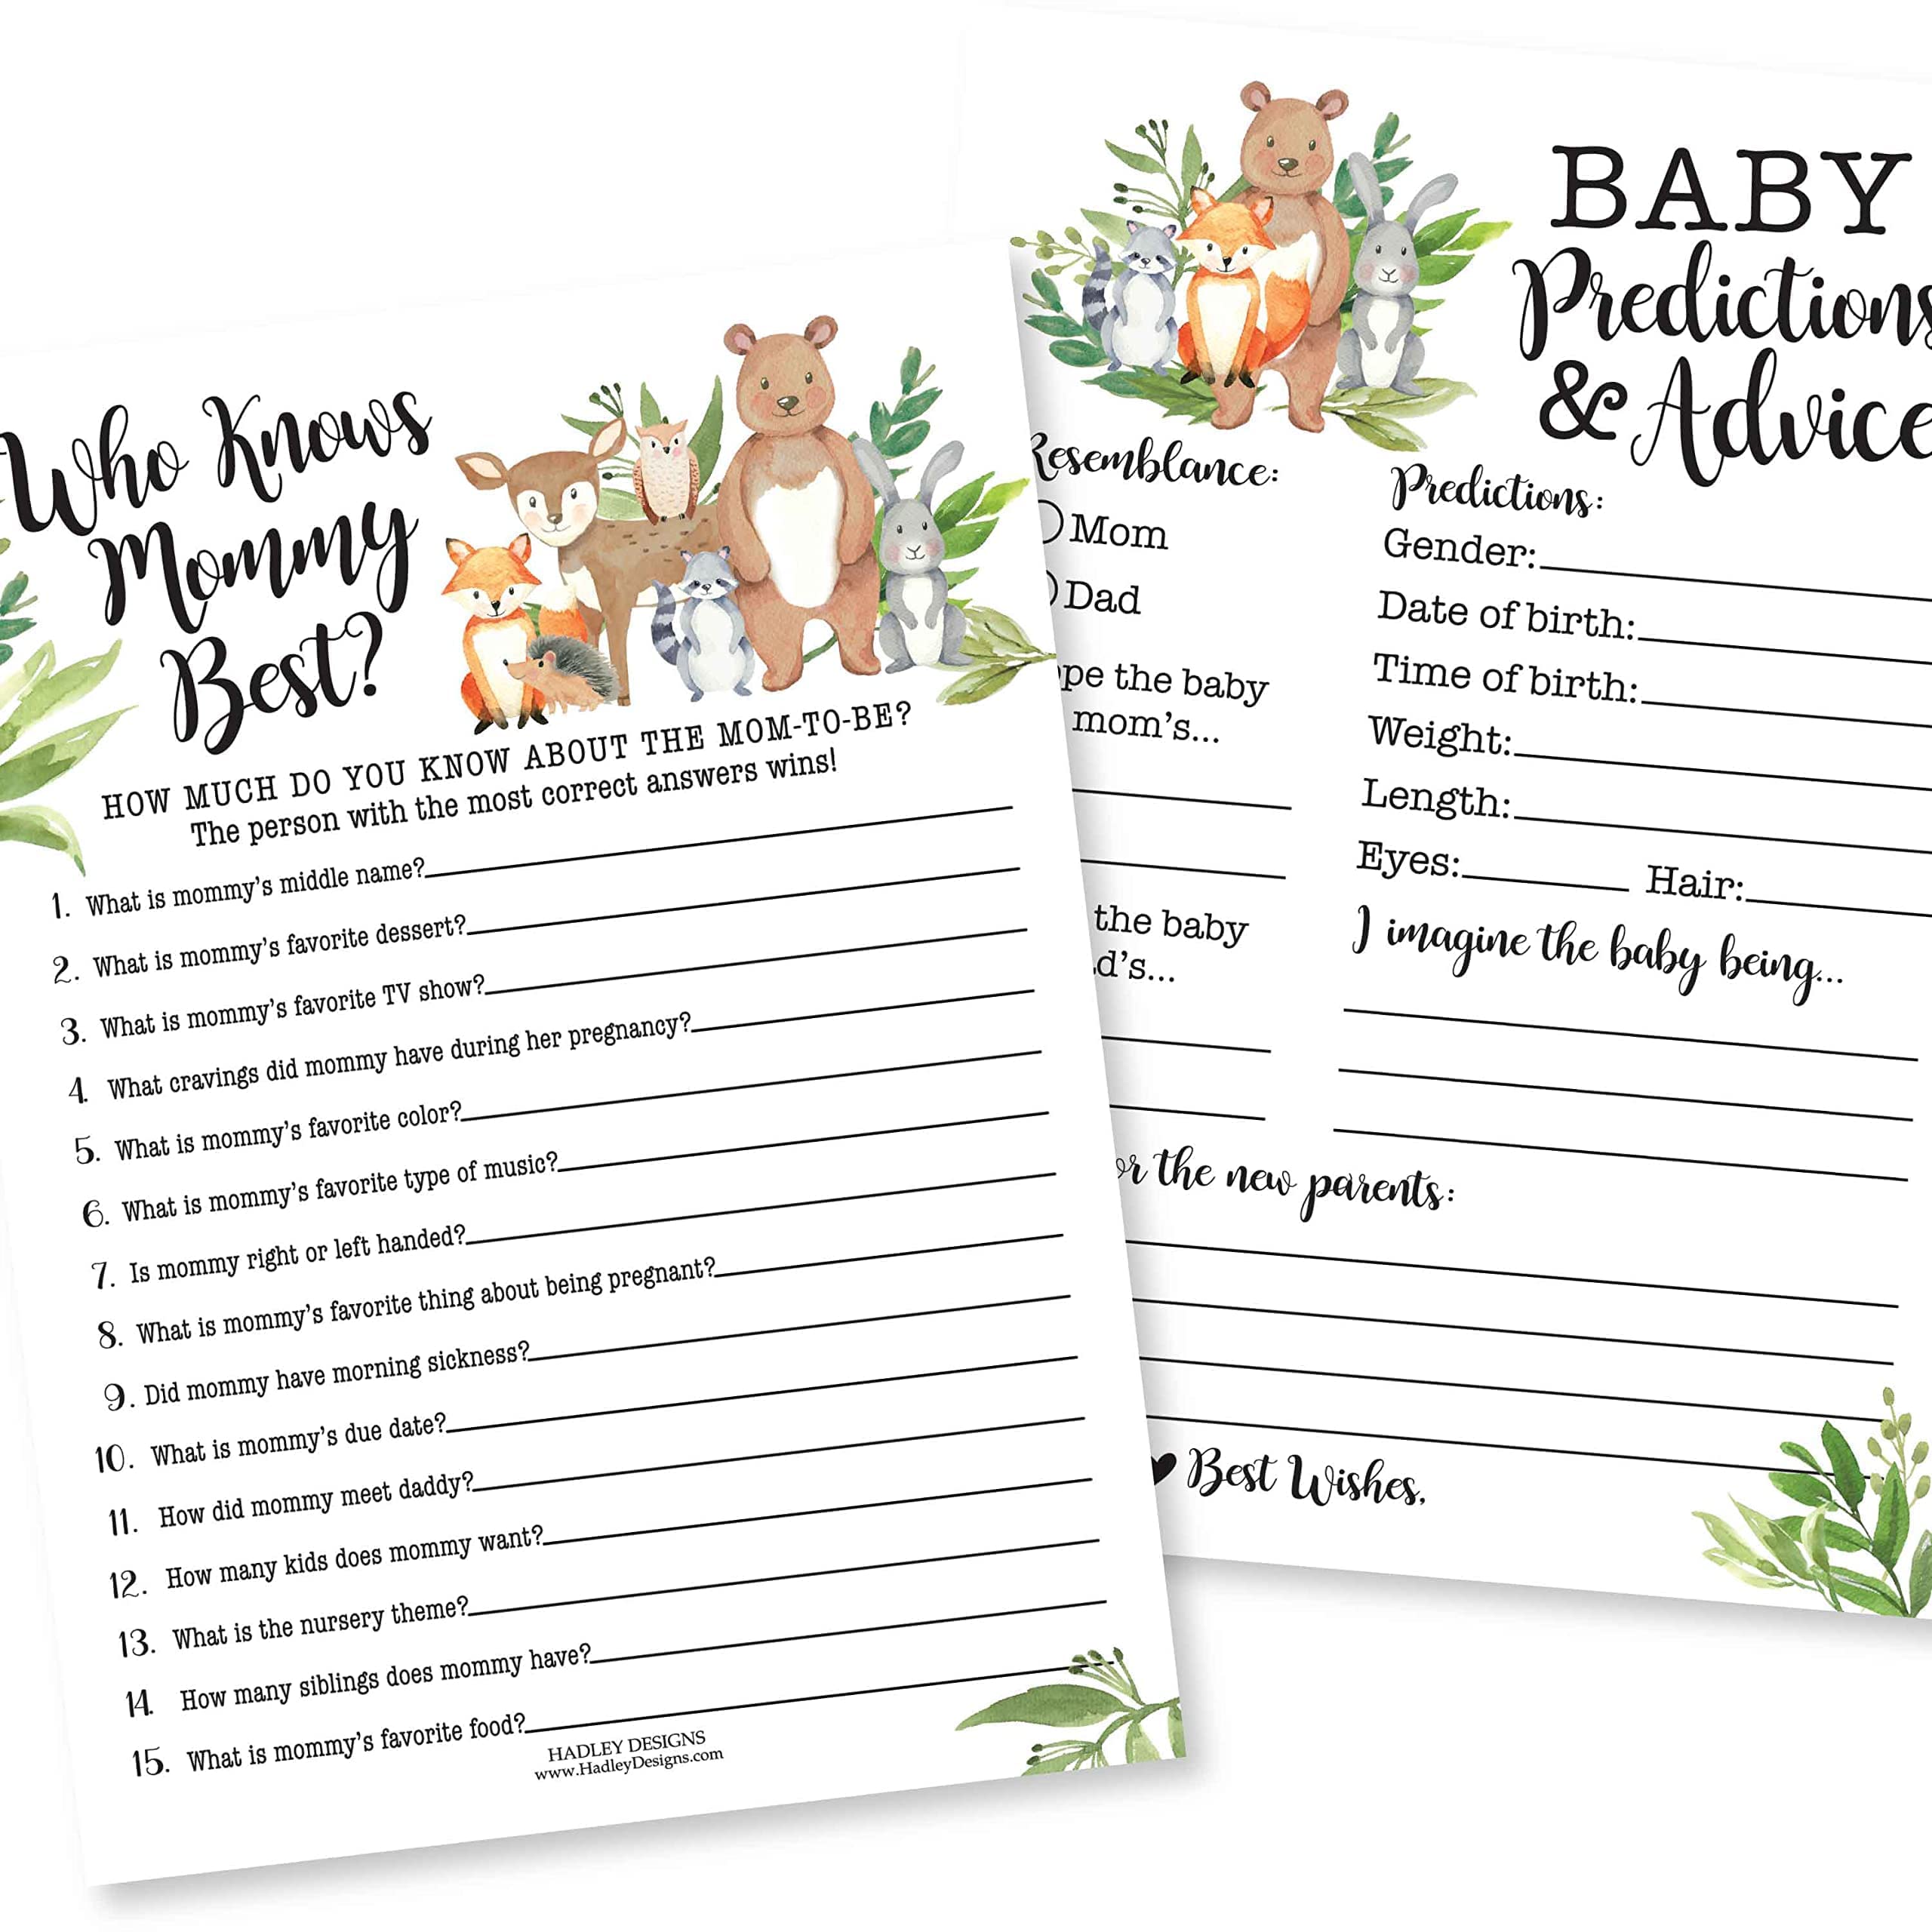 25 Woodland Animal Matching, 25 Nursery Rhyme Game, 25 Who Knows Mommy Best, 25 Baby Prediction And Advice Cards - 4 Double Sided Cards, Baby Shower Party Supplies